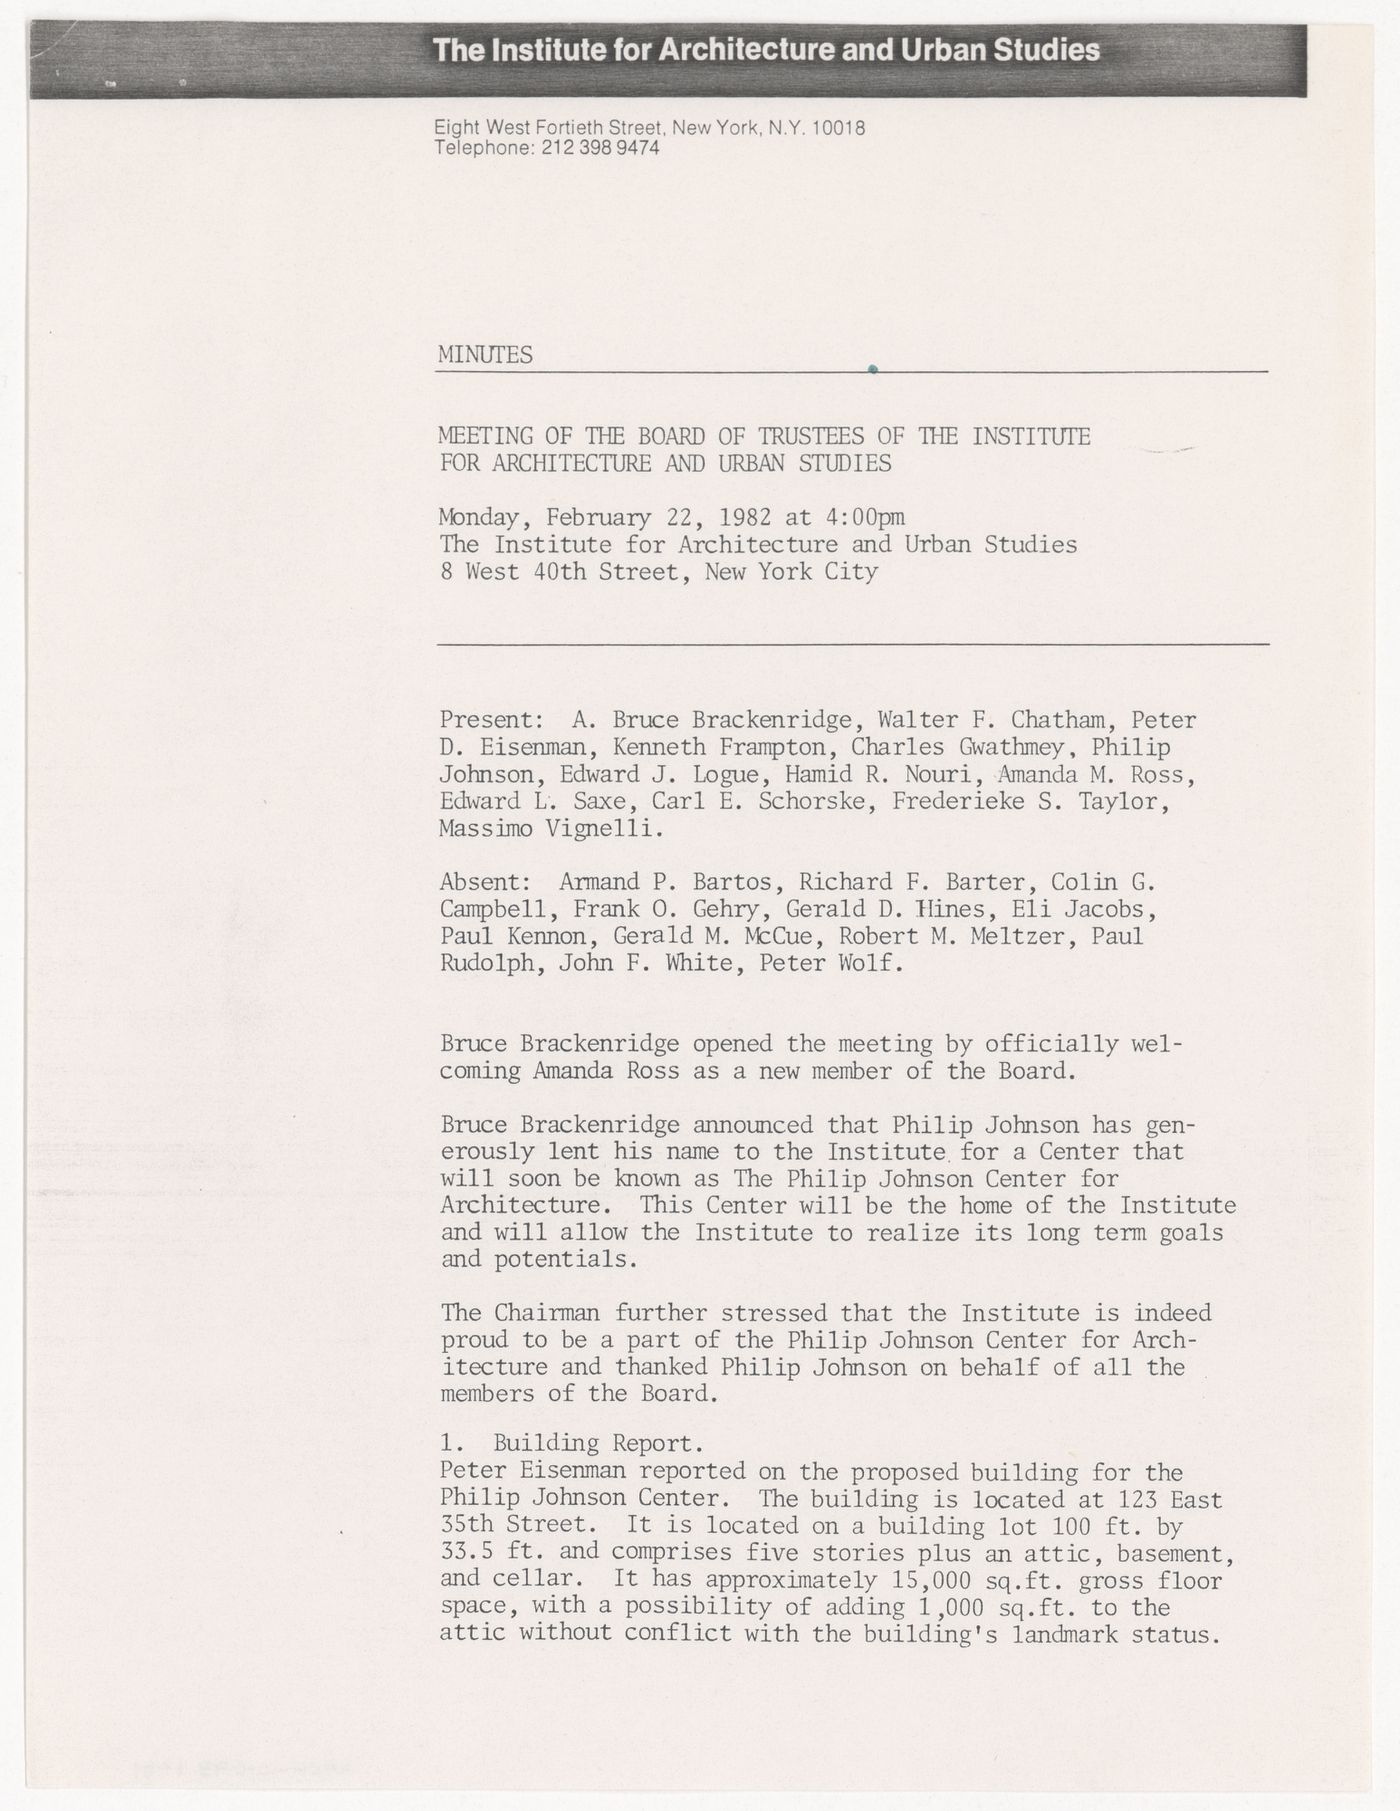 Memorandum from Hamid R. Nouri to Peter D. Eisenman with attached minutes of the meeting of the Board of Trustees on February 22nd, 1982